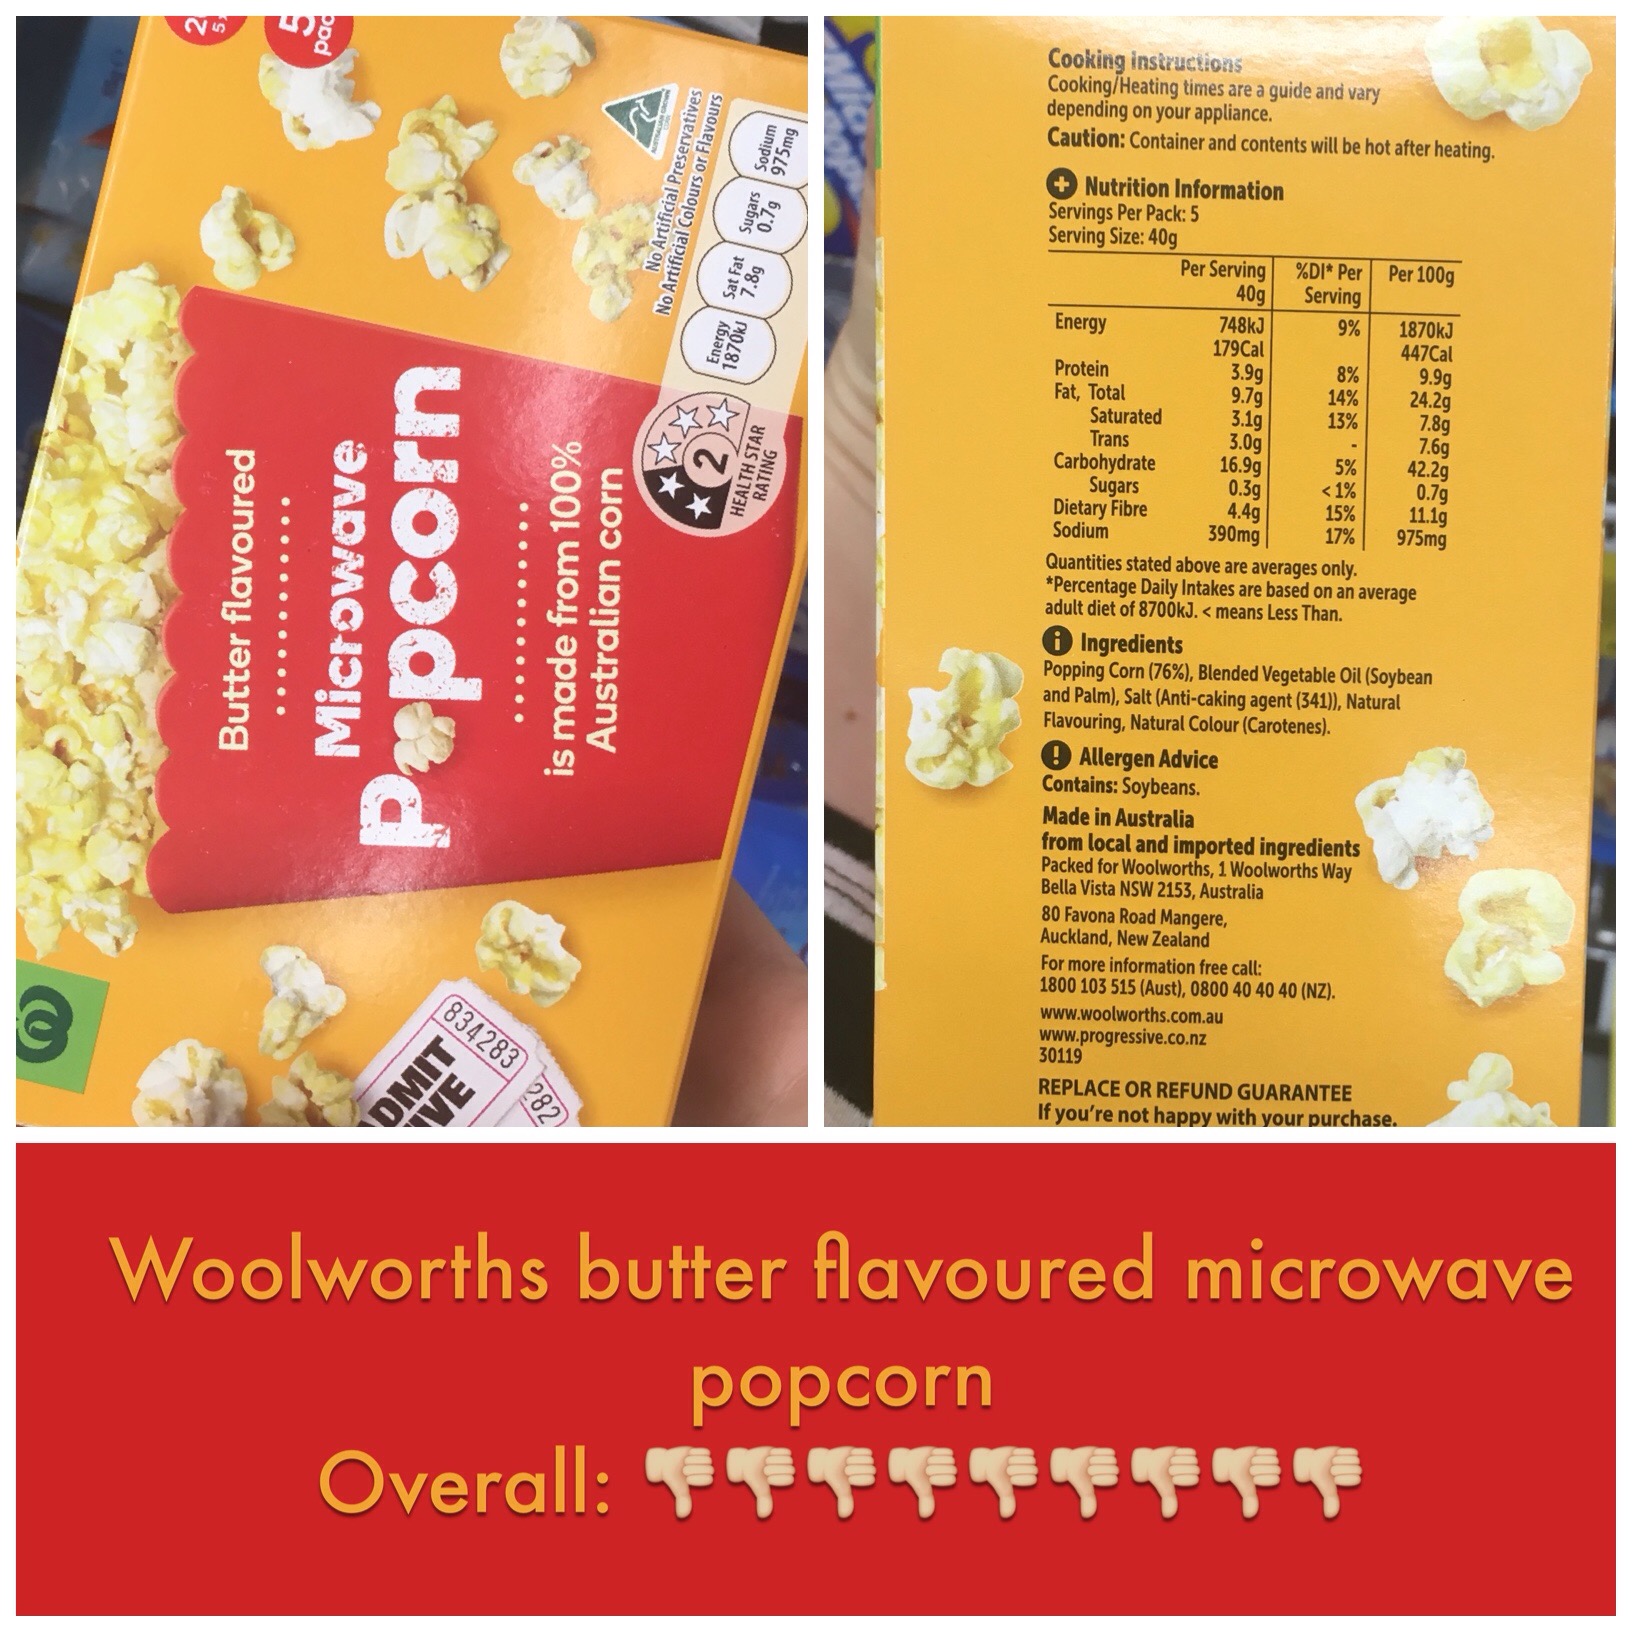 Woolworths-butter-flavoured-microwave-popcorn